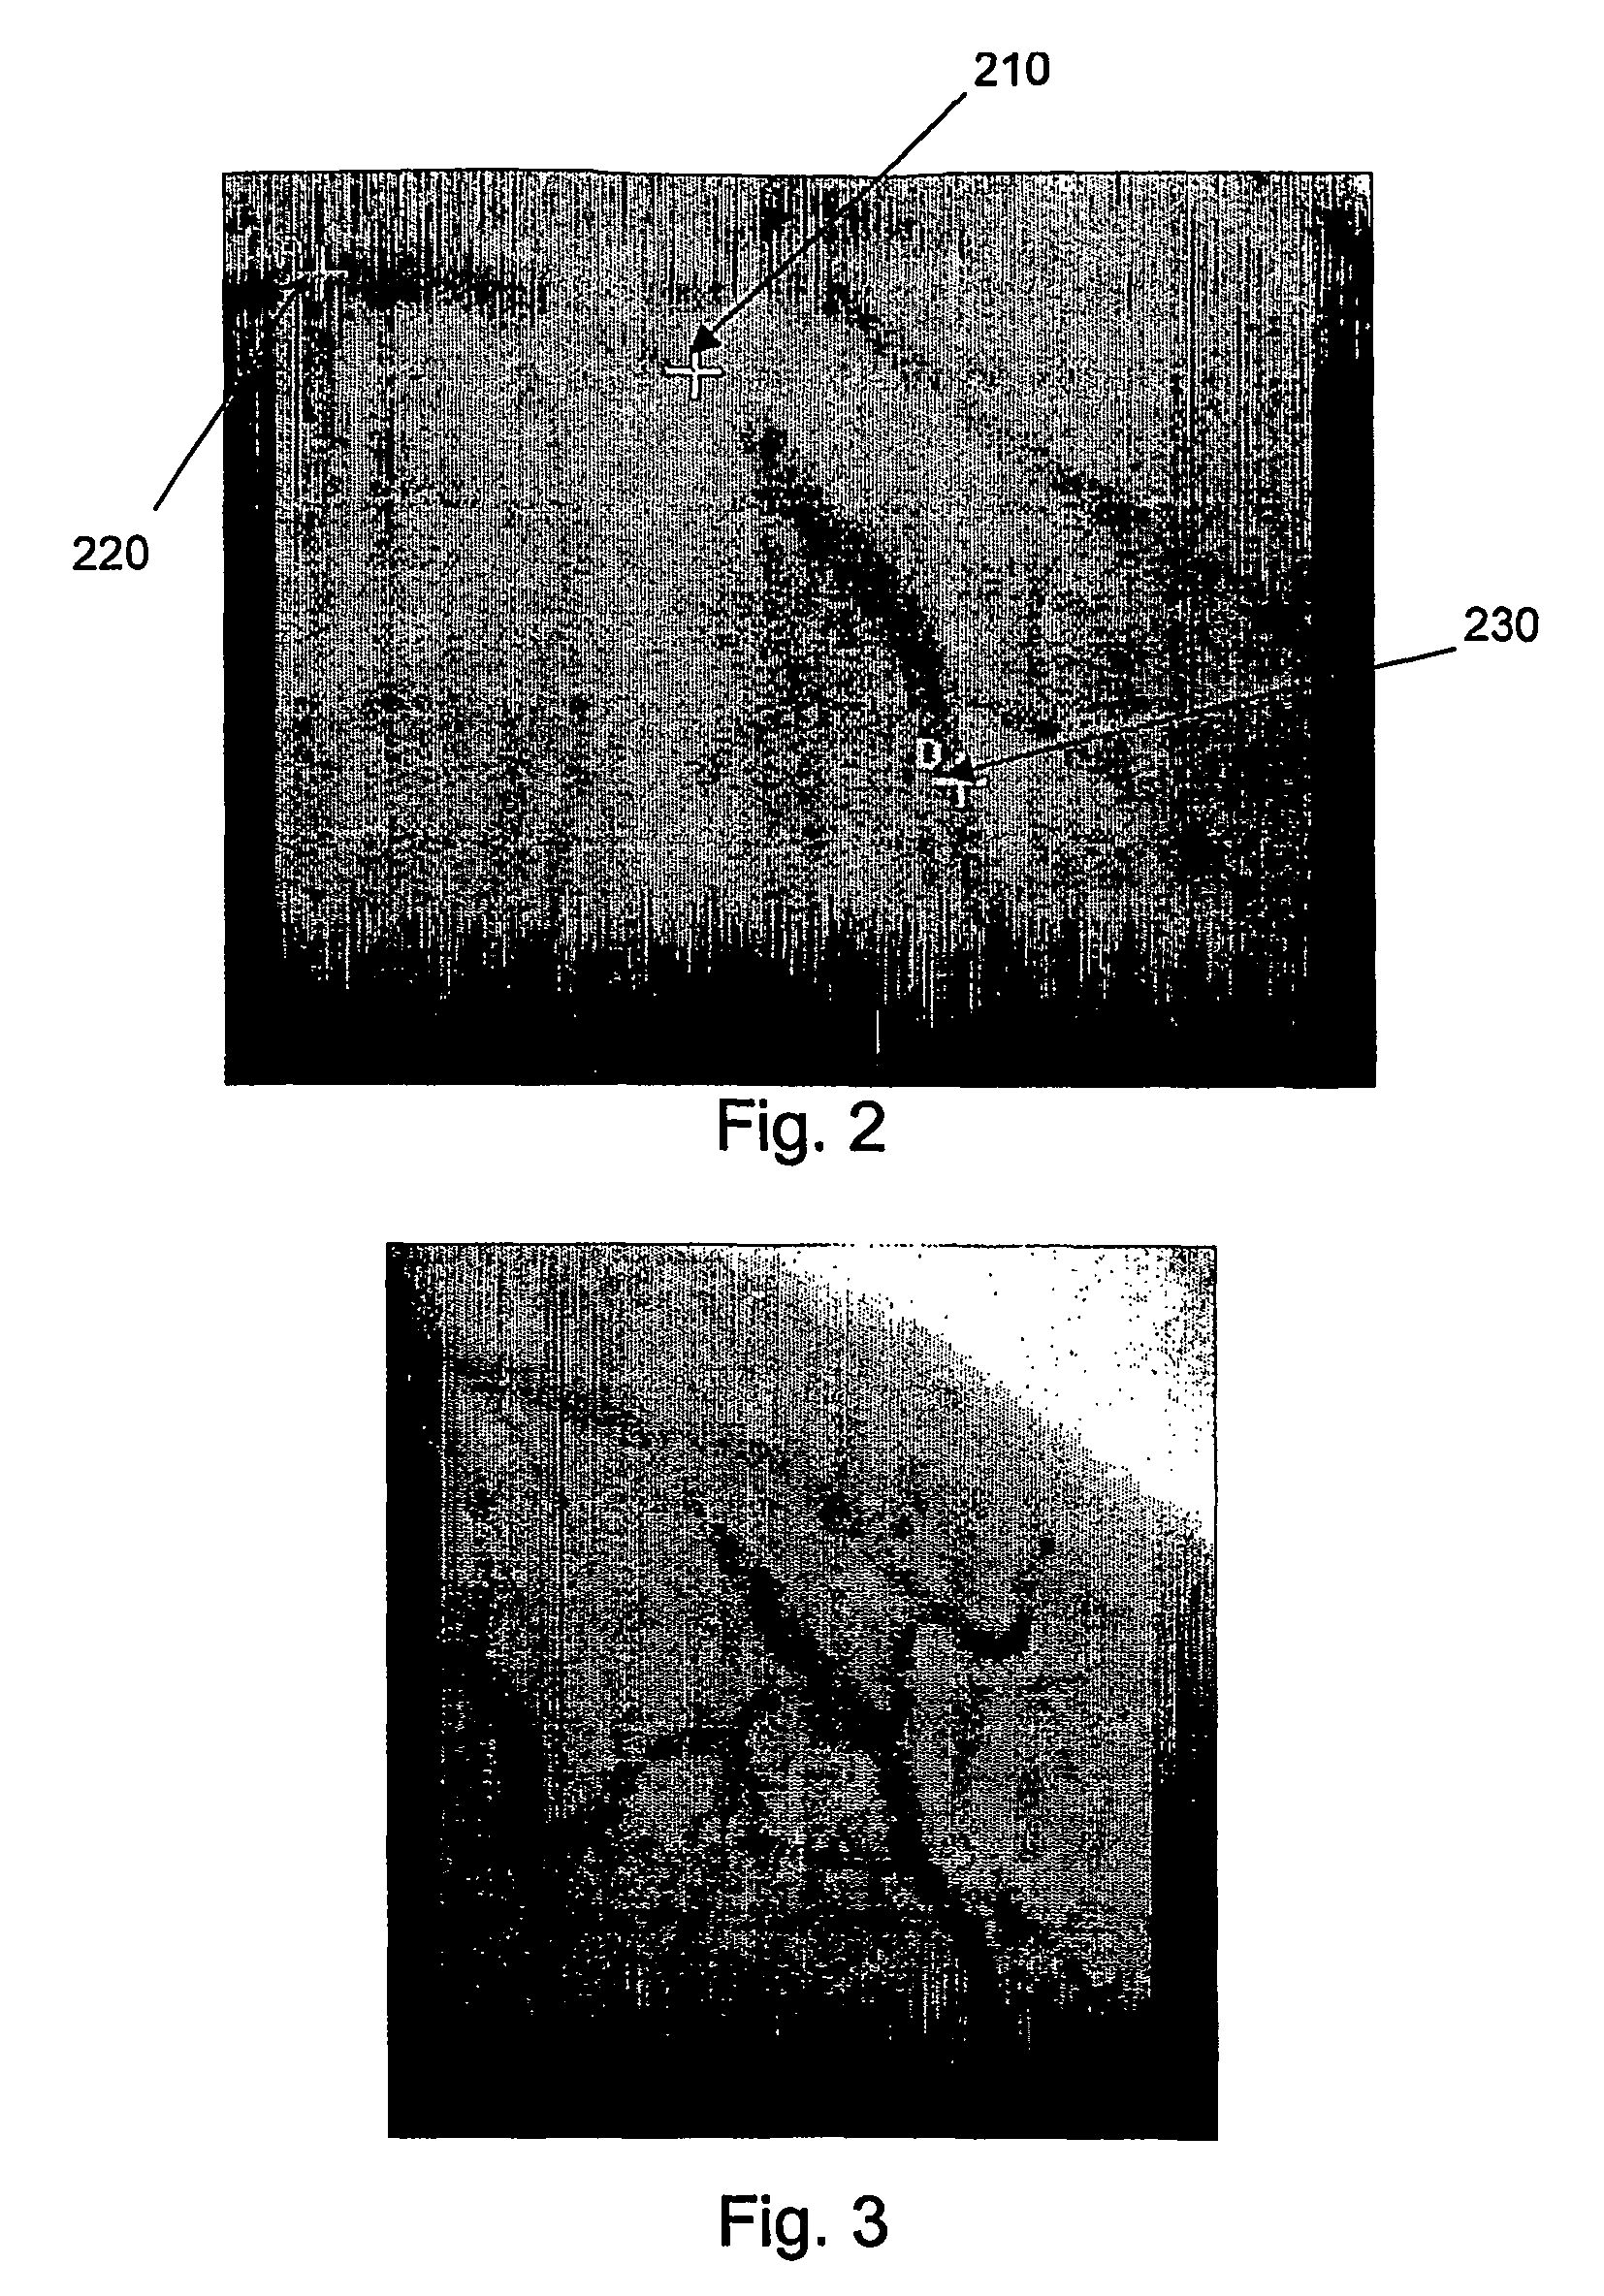 System and method for three-dimensional reconstruction of a tubular organ